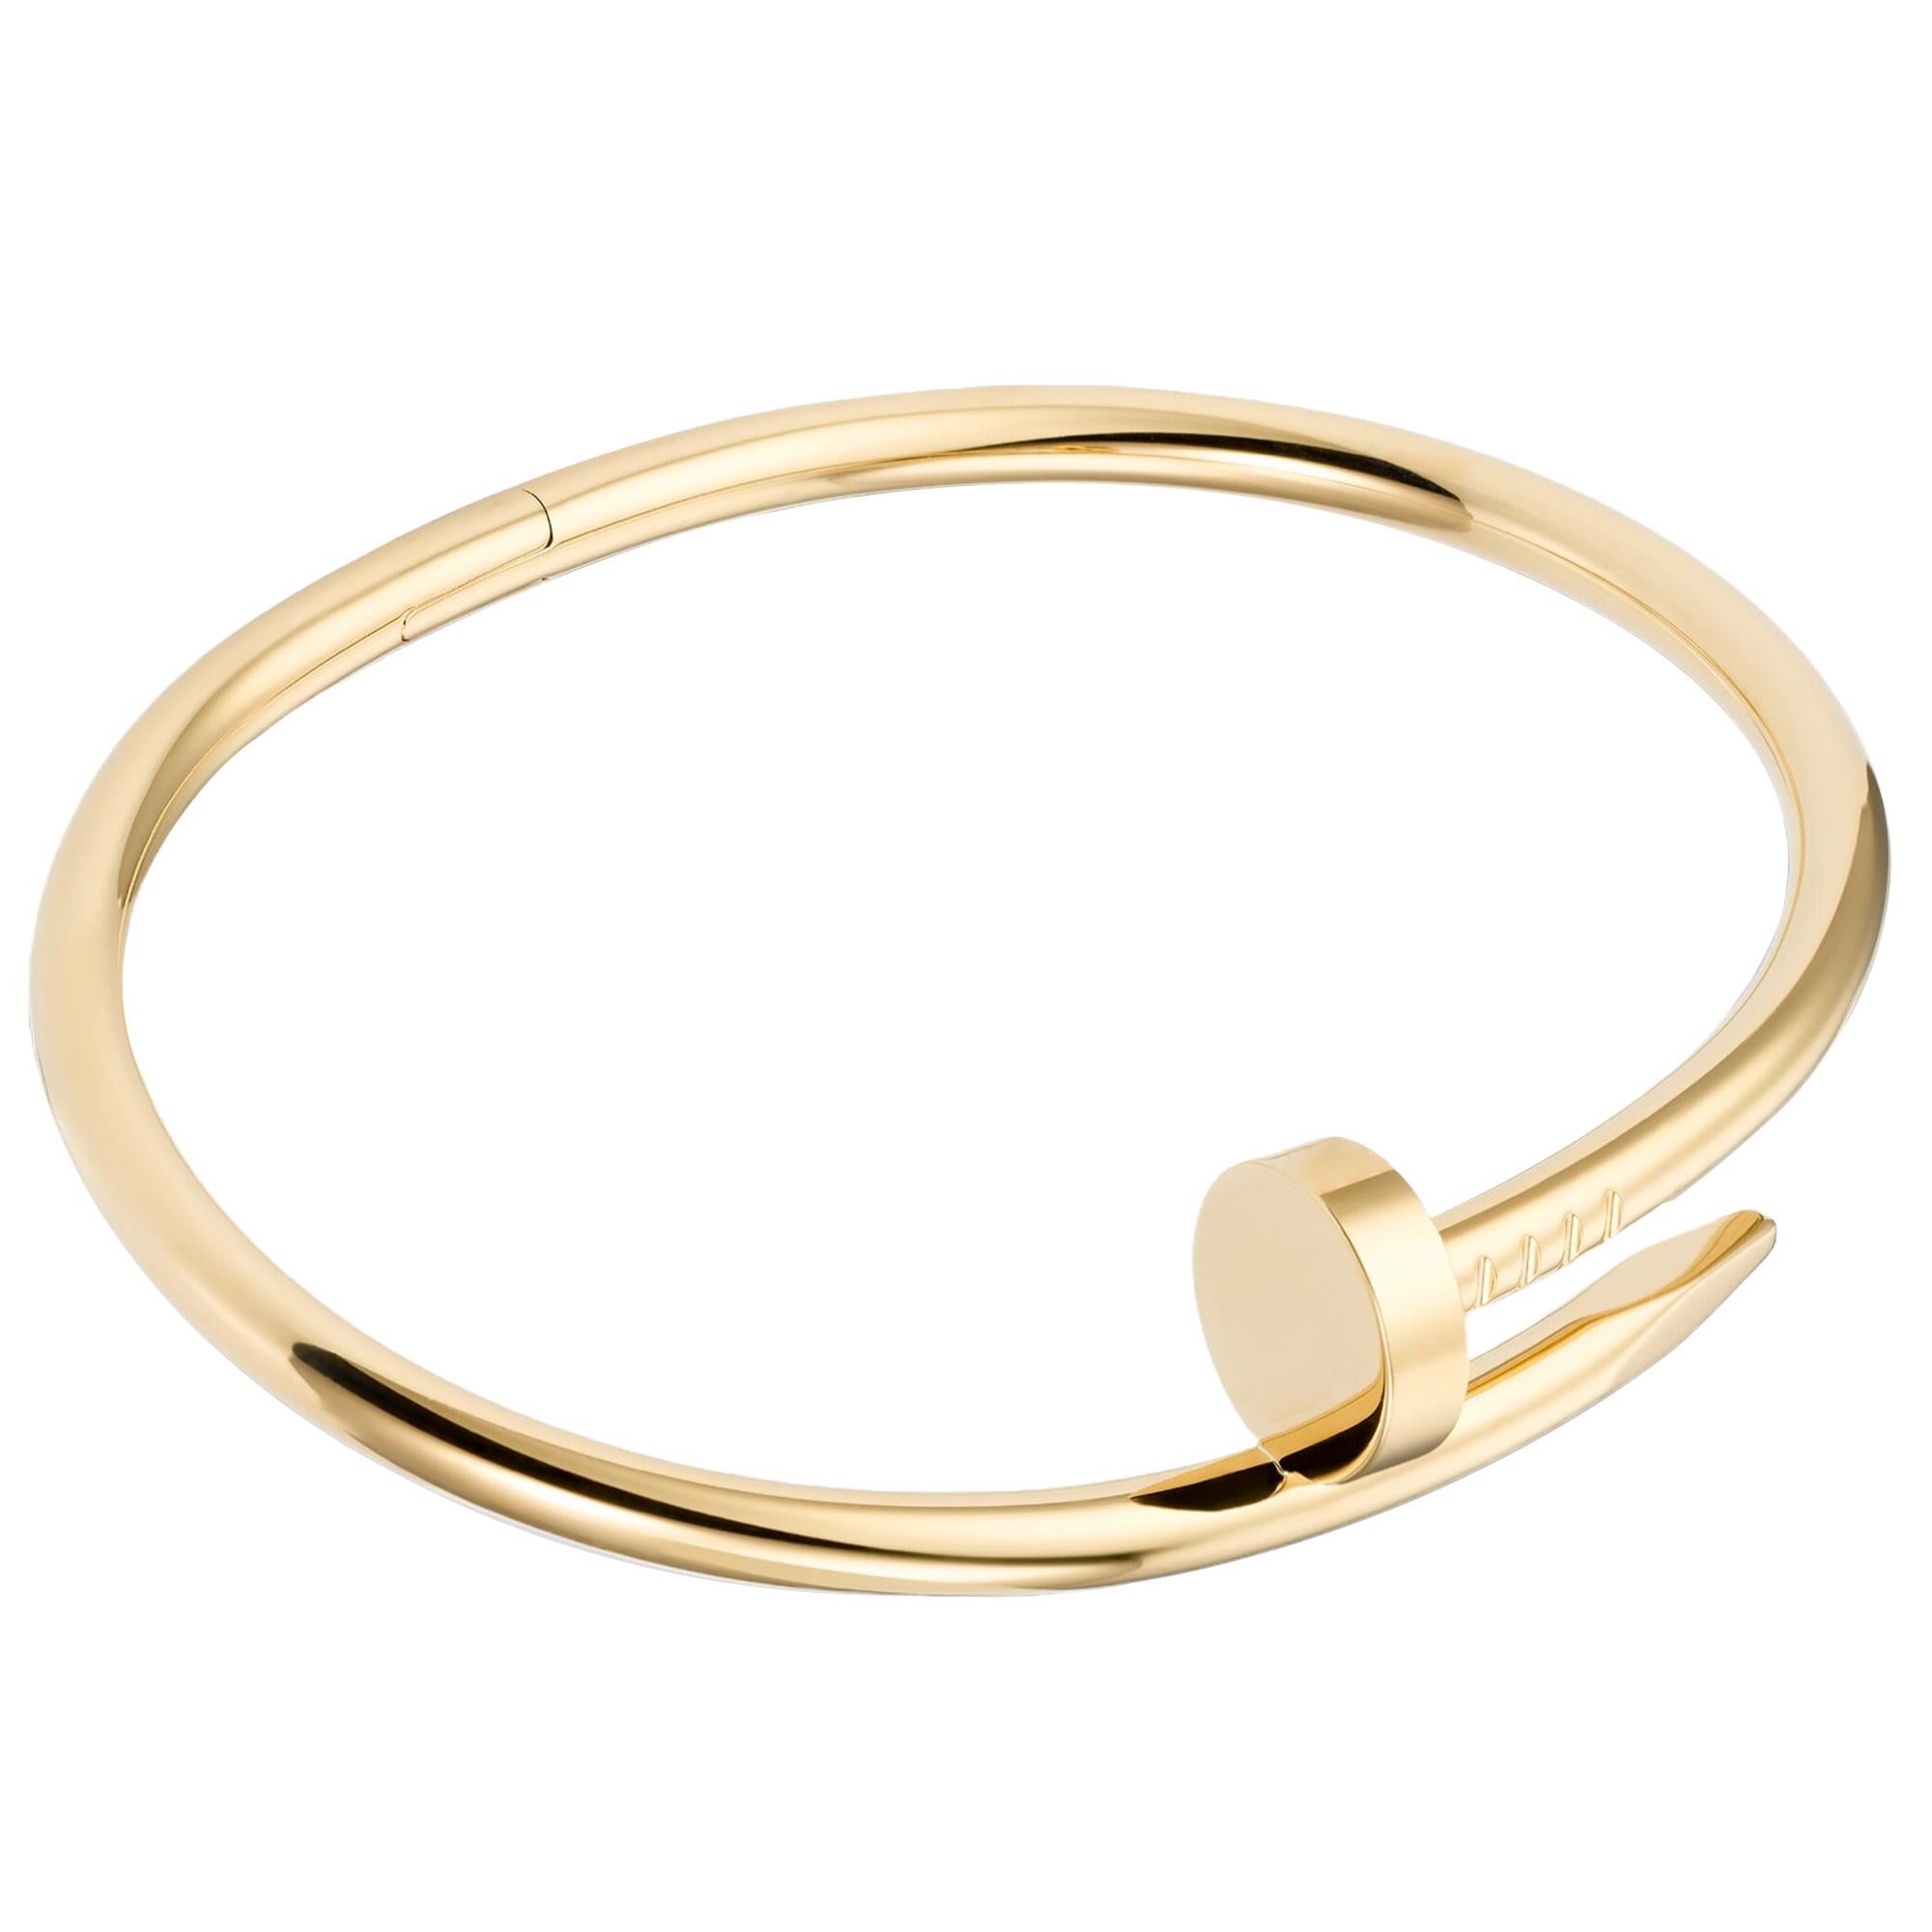 Juste un Clou bracelet, classic, 18K yellow gold (750/1000). Width: 3.5 mm (for size 15).

Details:
Brand: Cartier
Type: Classic Juste un Clou Bracelet
Material: Yellow Gold
Size: 15
Theme: Romantic, Love
Scope of Delivery: Box and Papers
Purchased